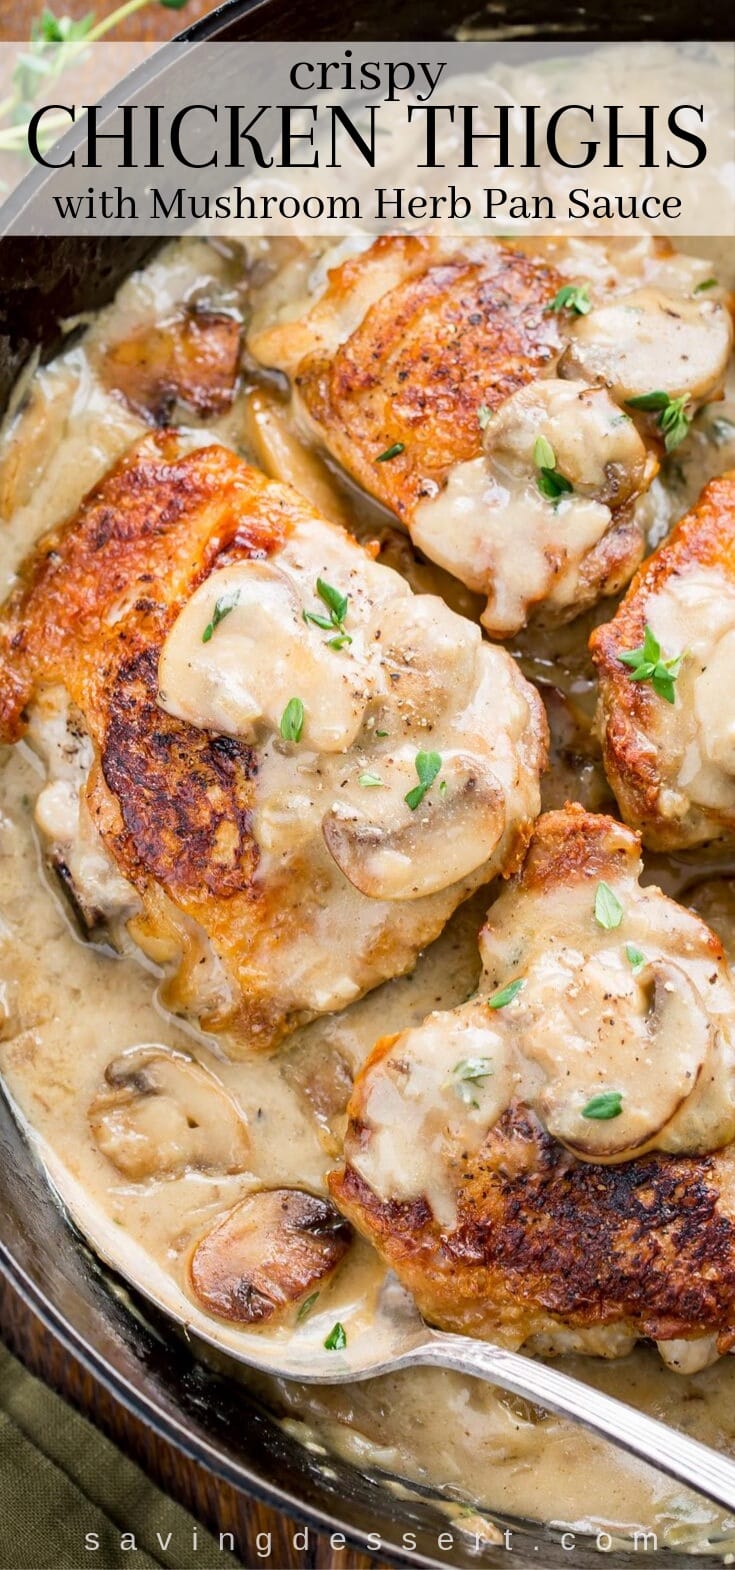 A skillet filled with crispy chicken thighs in a mushroom herb pan sauce